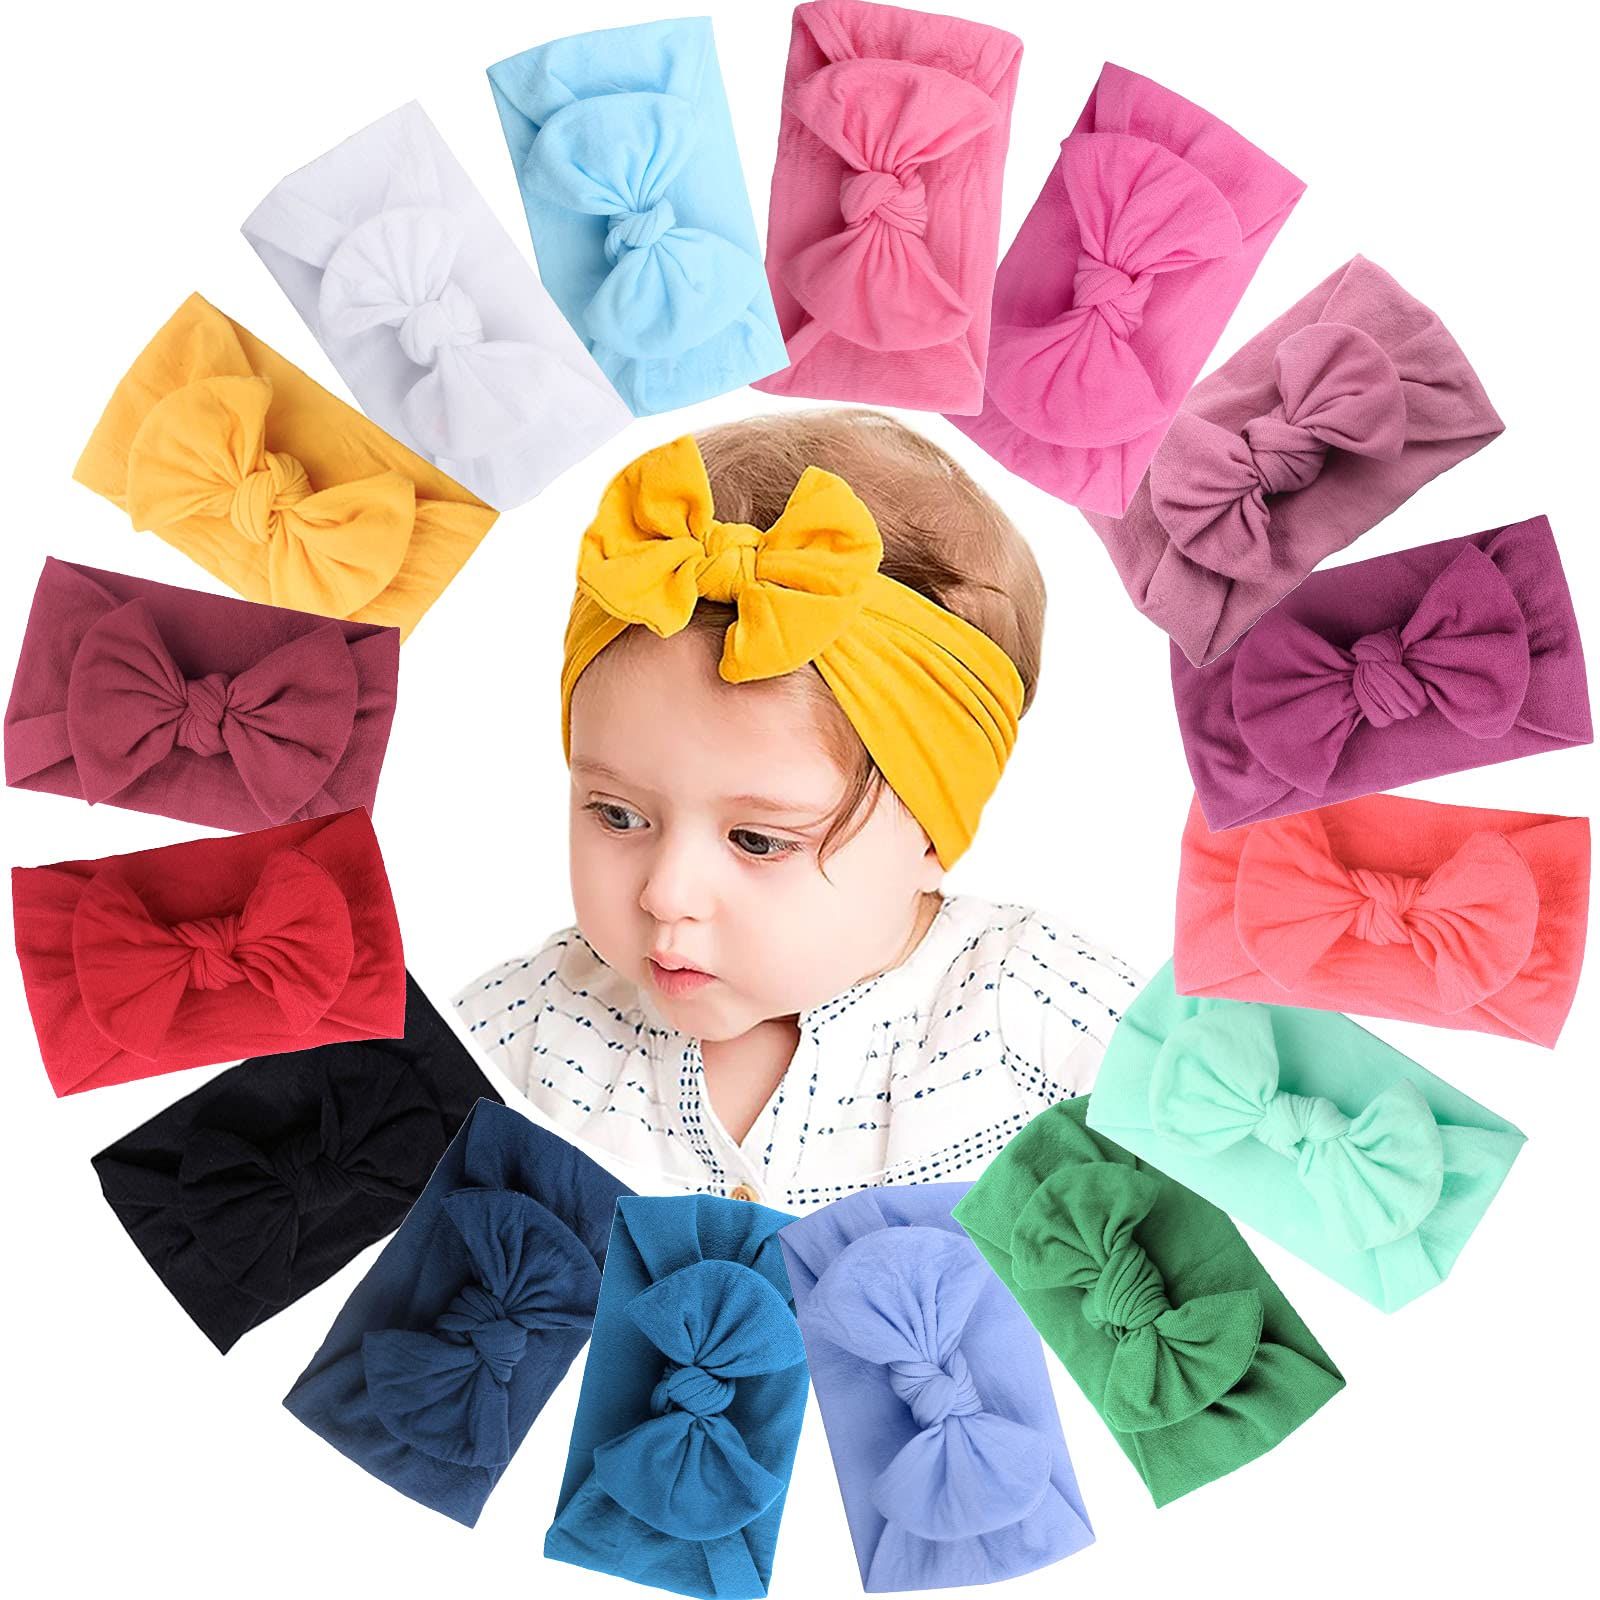 JOYOYO 16 Colors Soft Wide Turban Baby Headbands with 4.5 inches Hair Bow Headwraps for Baby Girls I | Amazon (US)